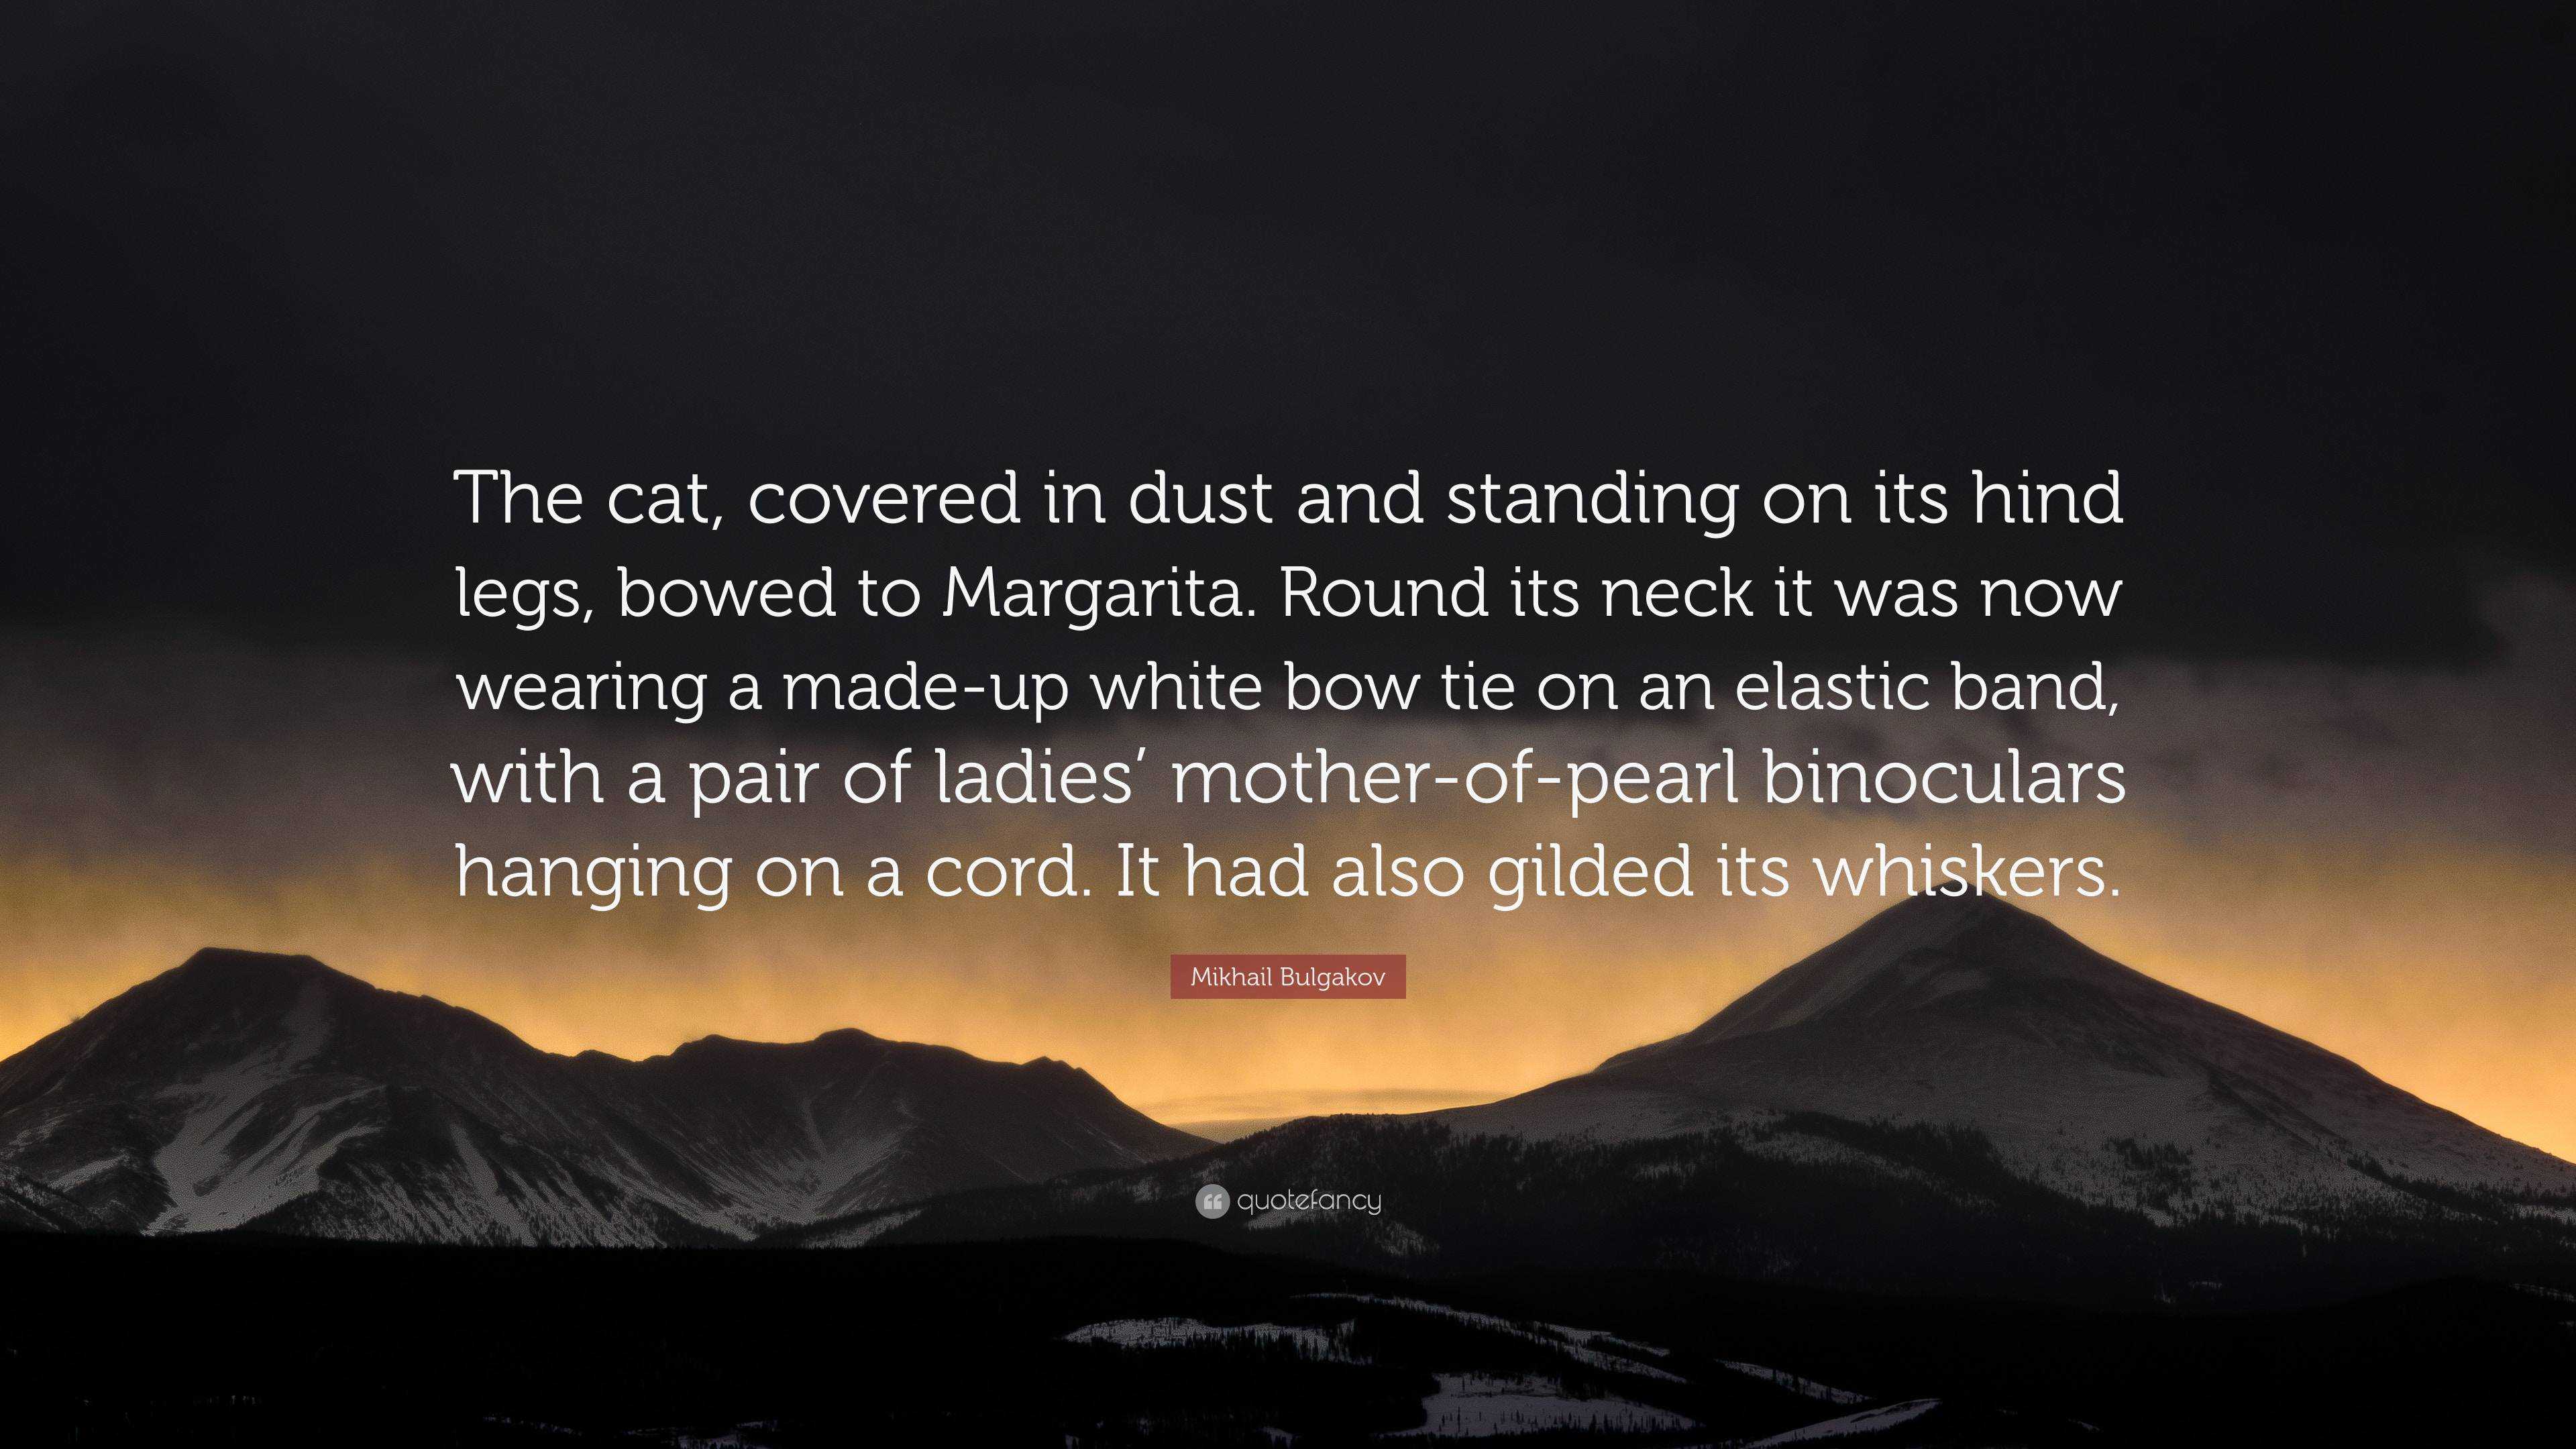 Mikhail Bulgakov Quote: “The cat, covered in dust and standing on its ...